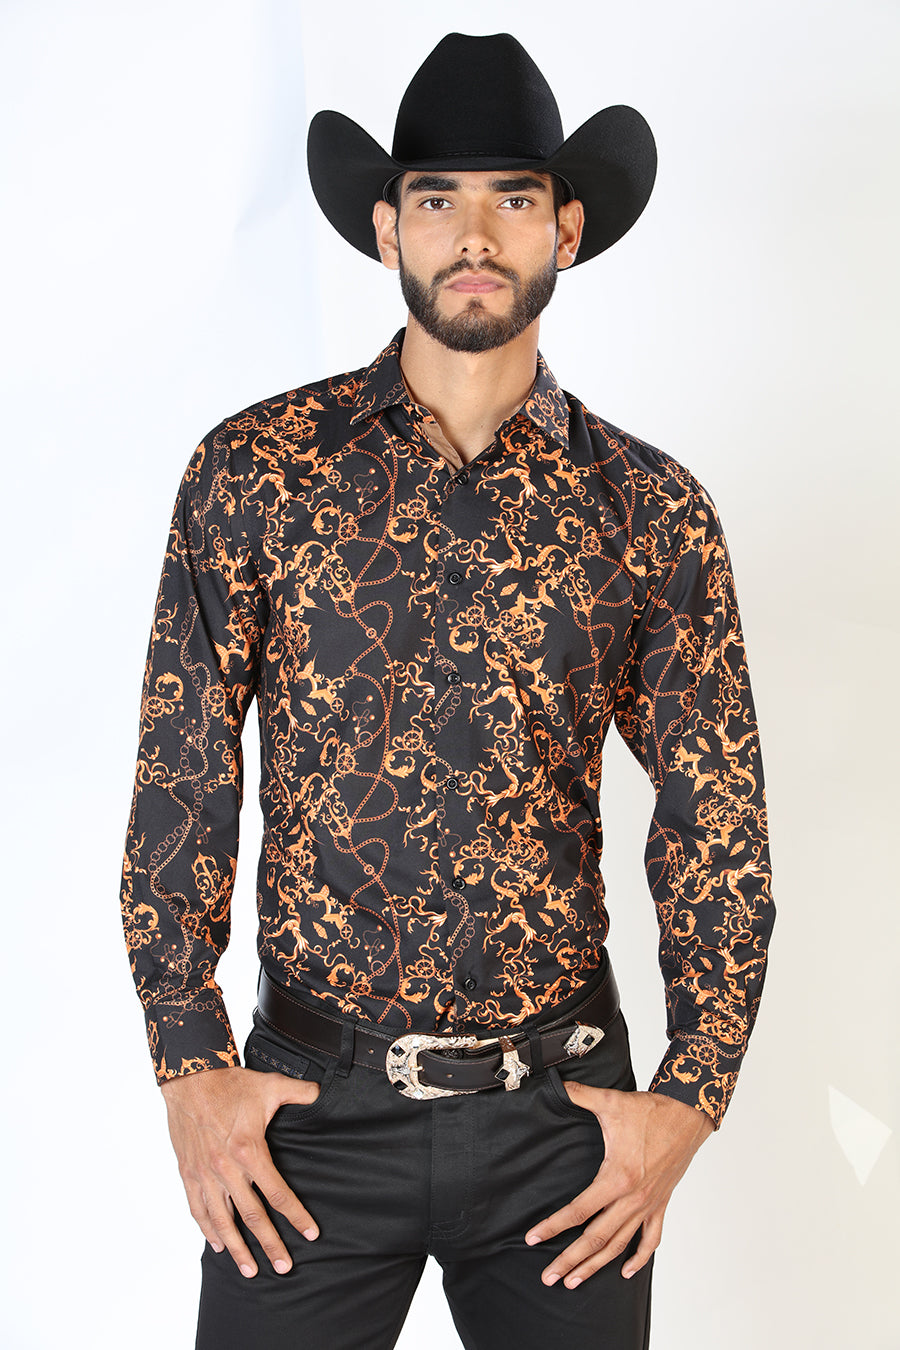 Black Printed Long Sleeve Denim Shirt for Men 'The Lord of the Skies' - ID: 126268